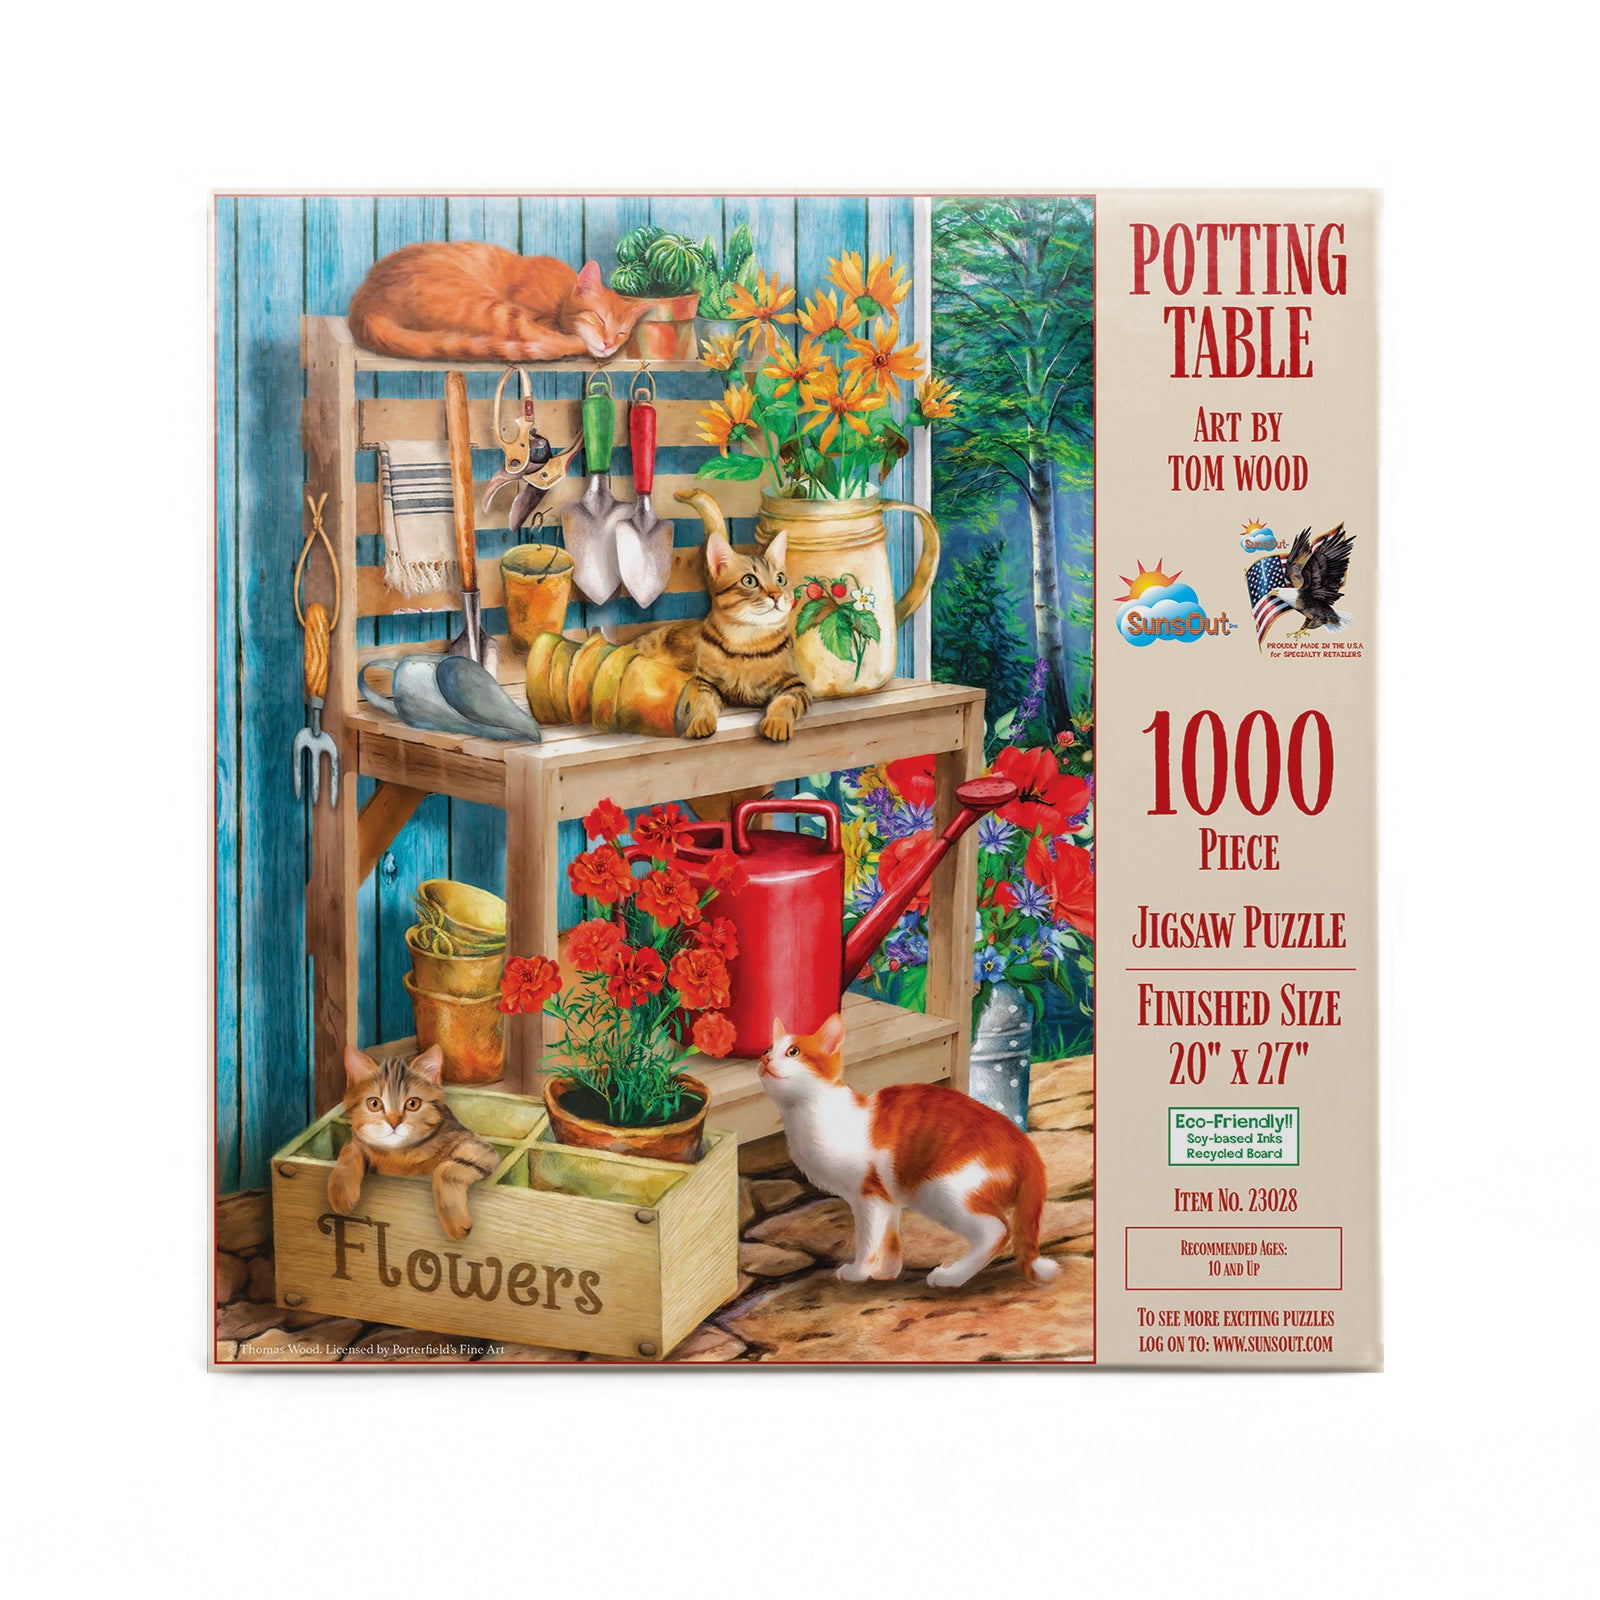 Potting Table 1000 Piece Jigsaw Puzzle